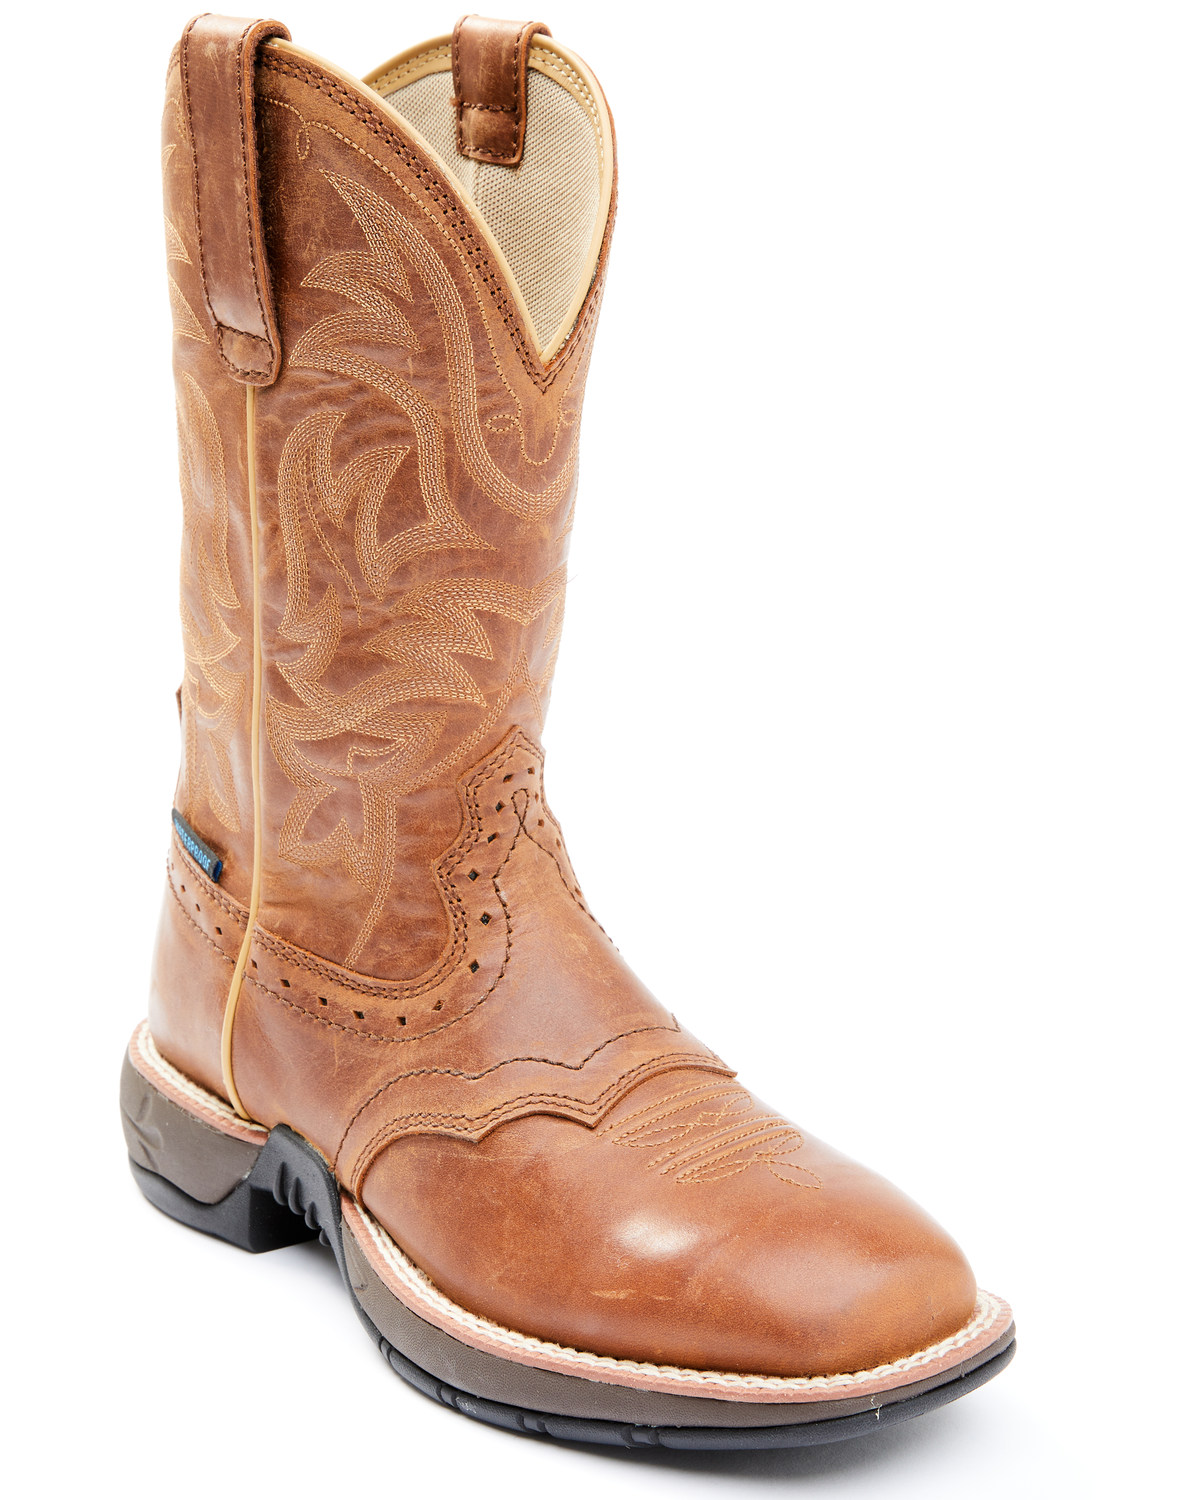 Shyanne Women's Xero Gravity Charley Lite Performance Western Boots - Broad Square Toe